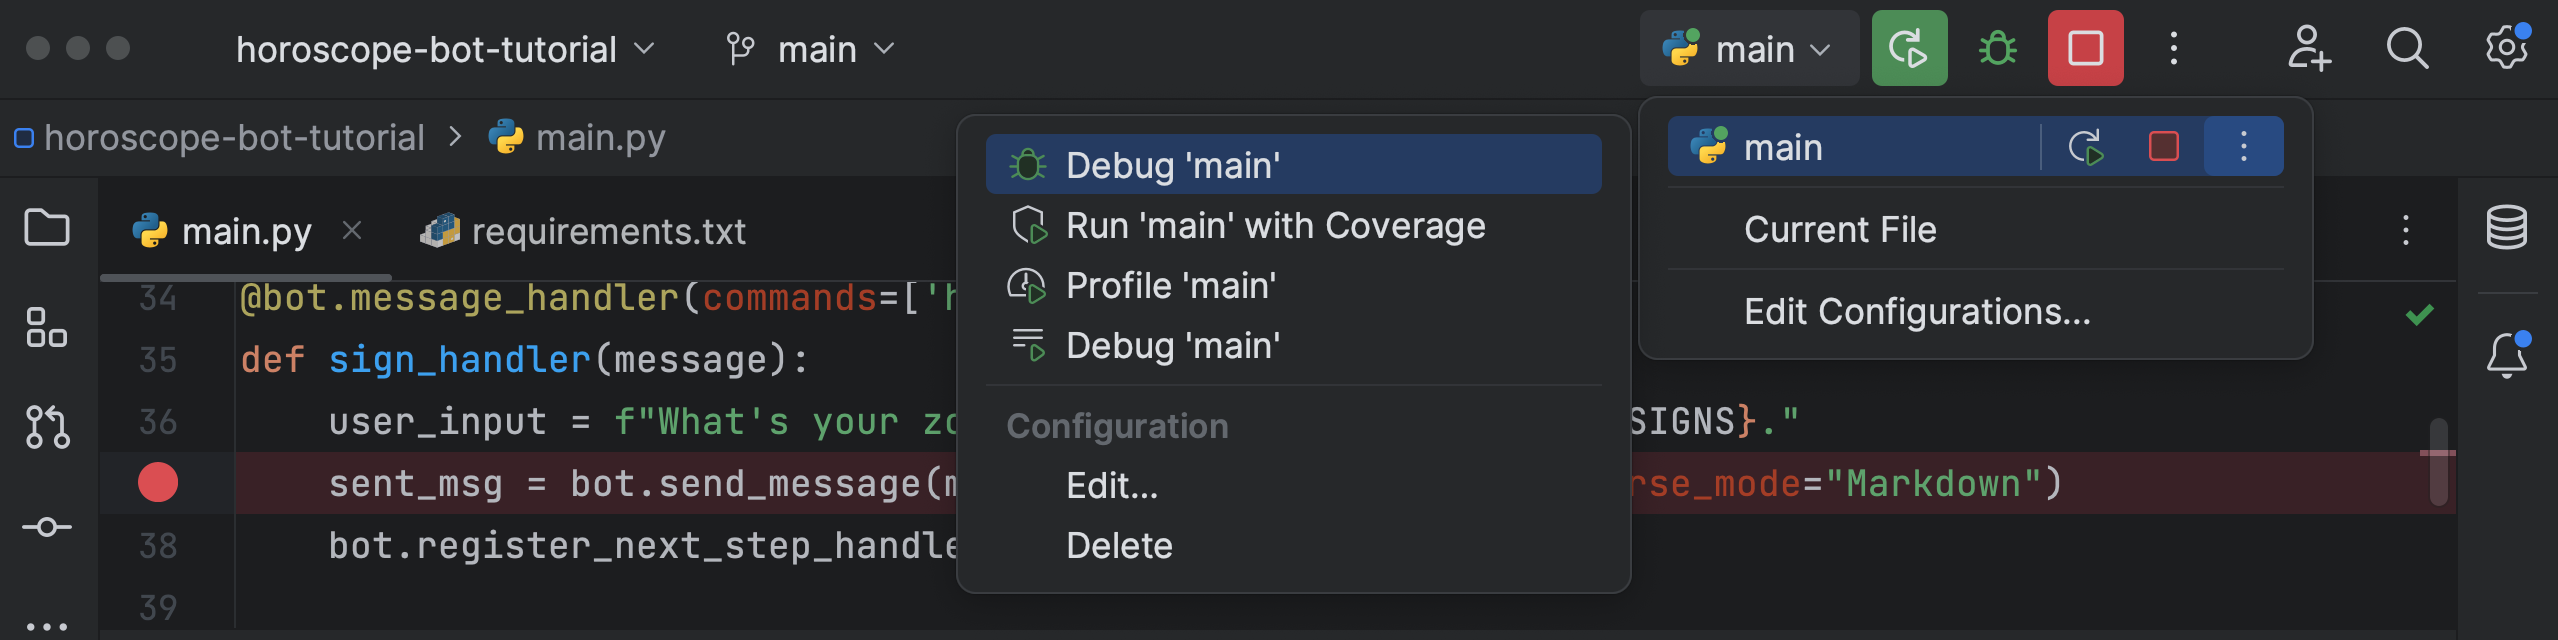 Accessing your run configurations from the drop-down menu